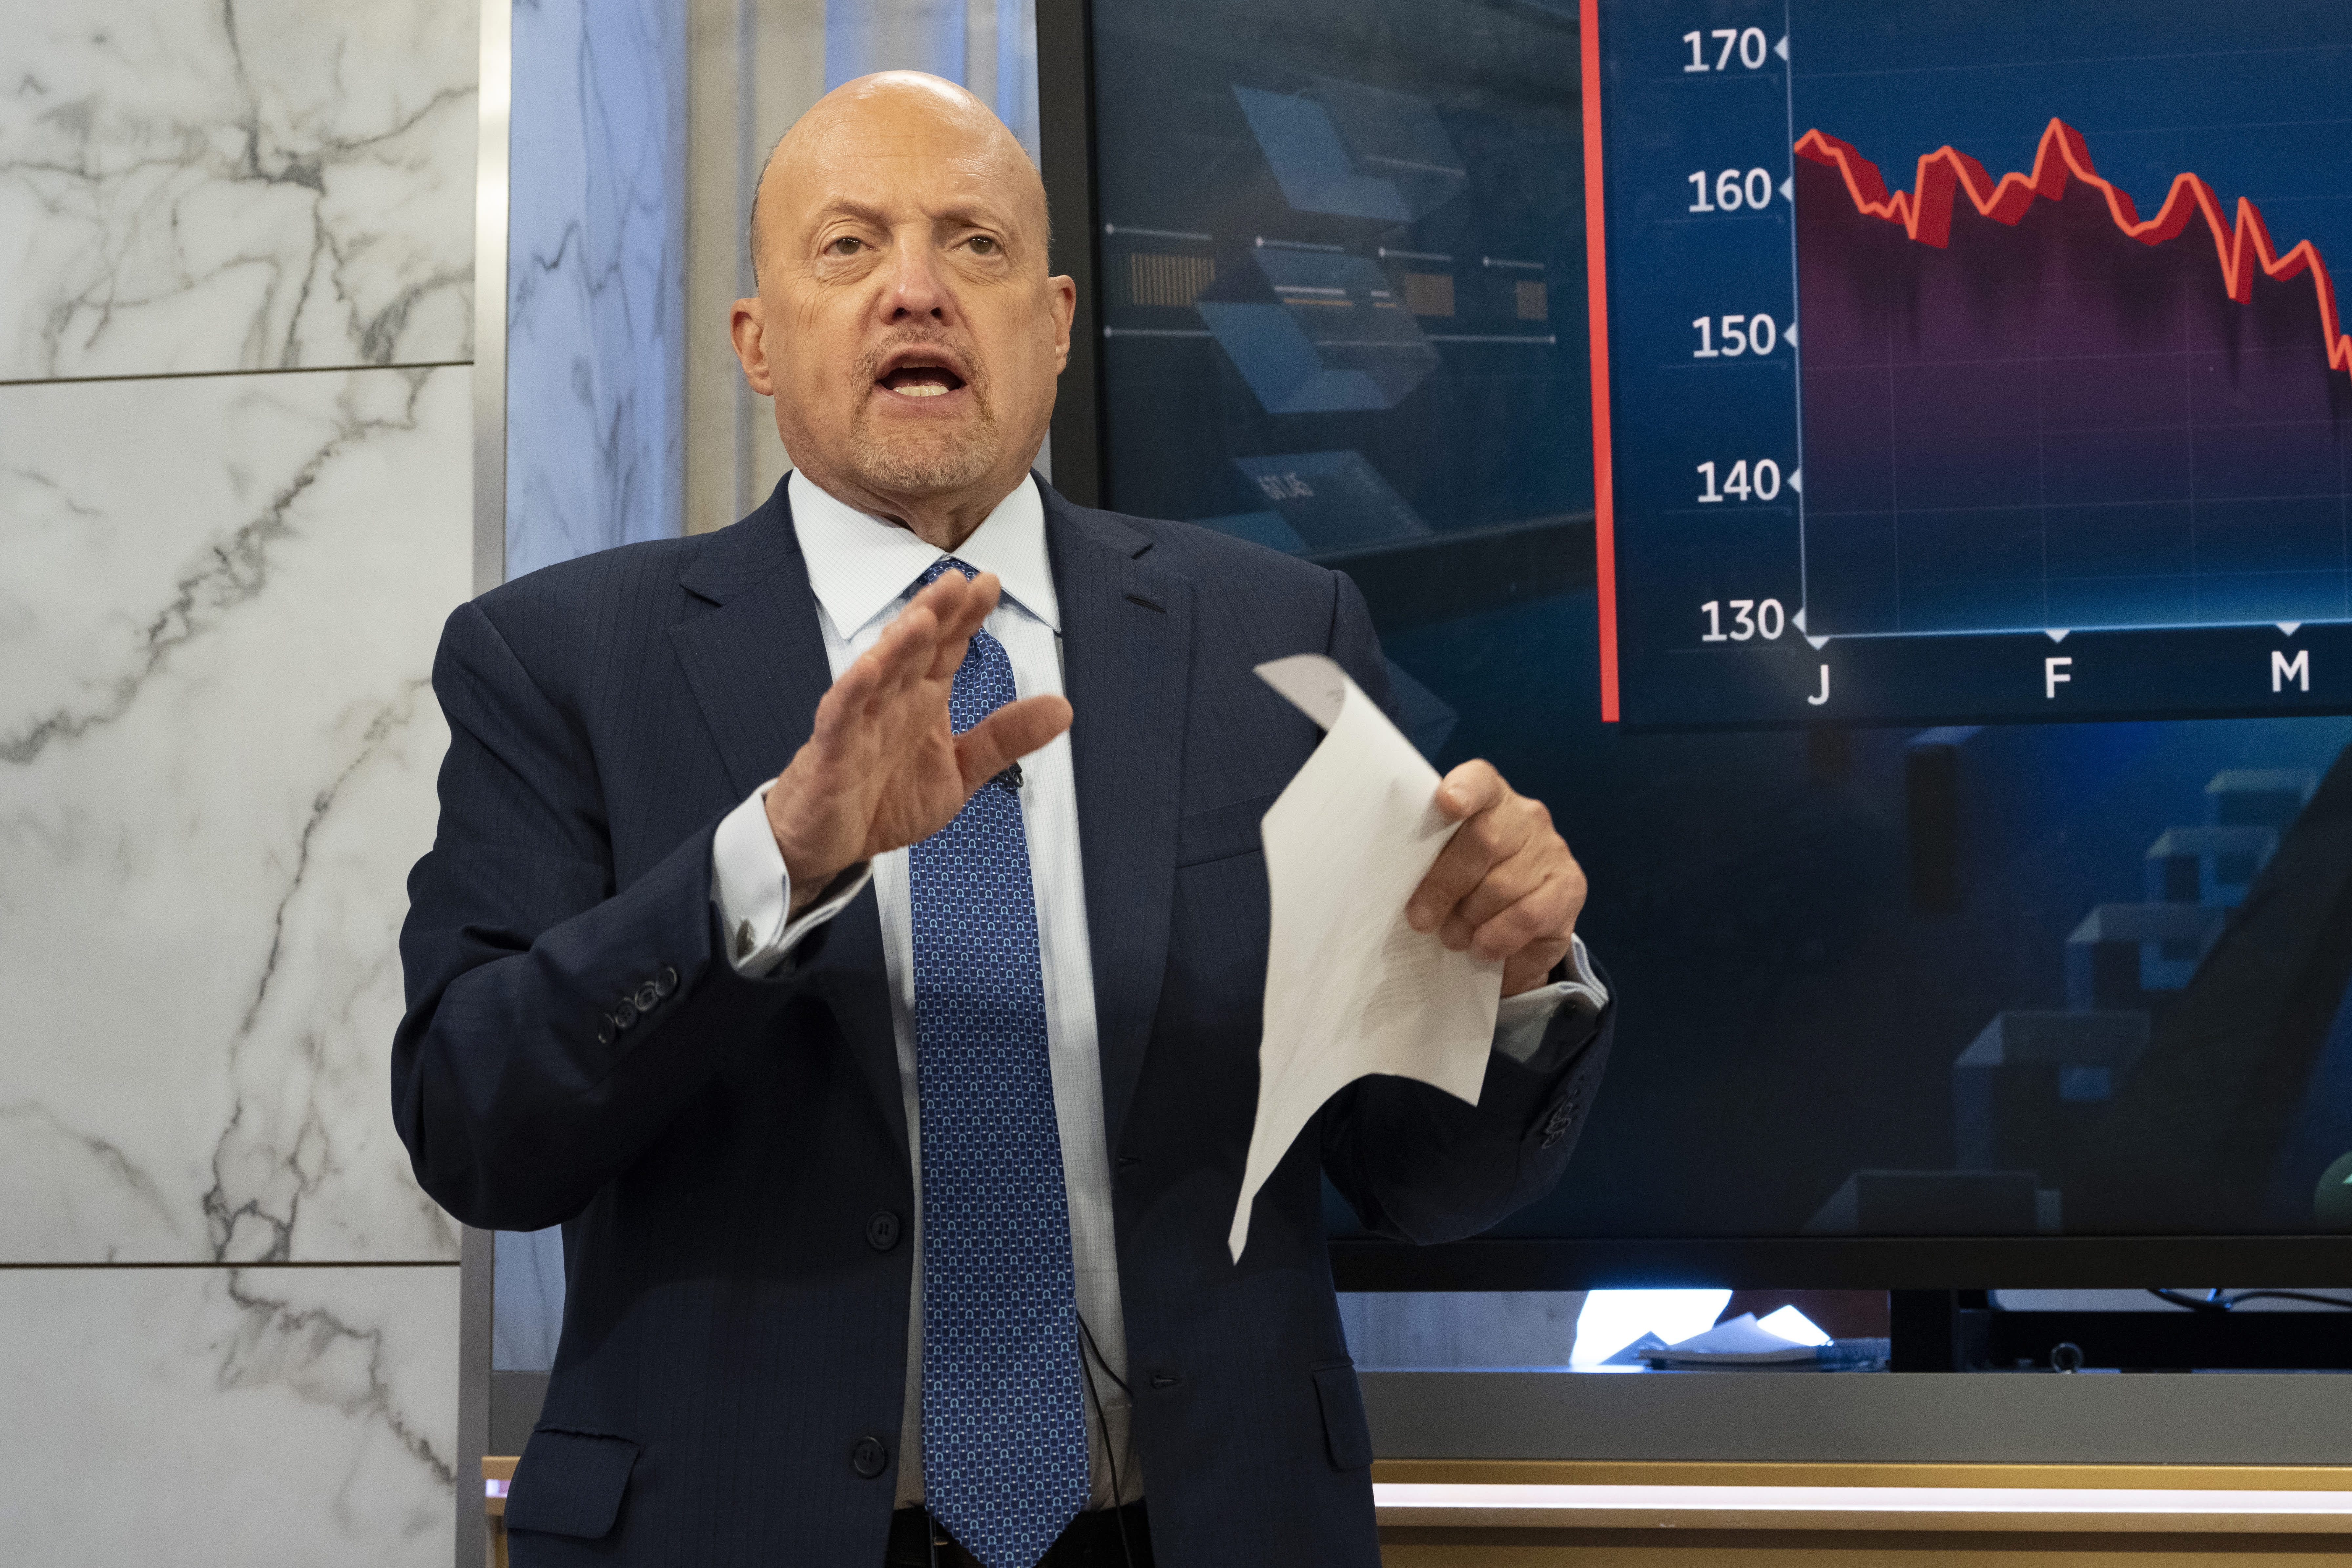 Jim Cramer's Investing Club meeting Monday: Consumer prices, overvalued tech stocks, oil 